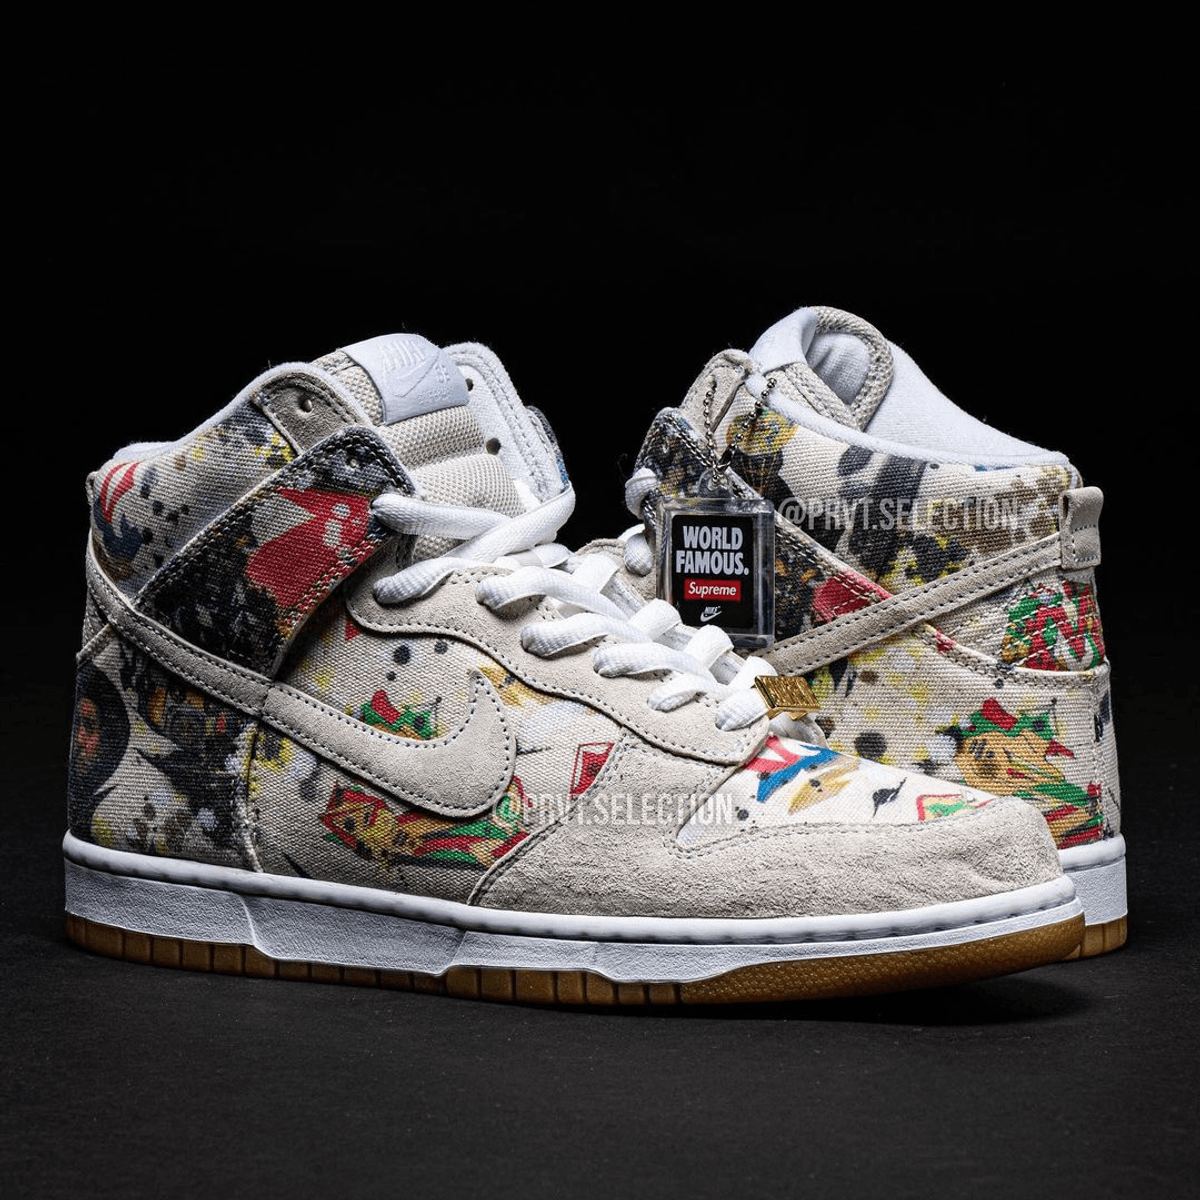 The Supreme SB Dunk High Is Reminiscent Of The SB Paris